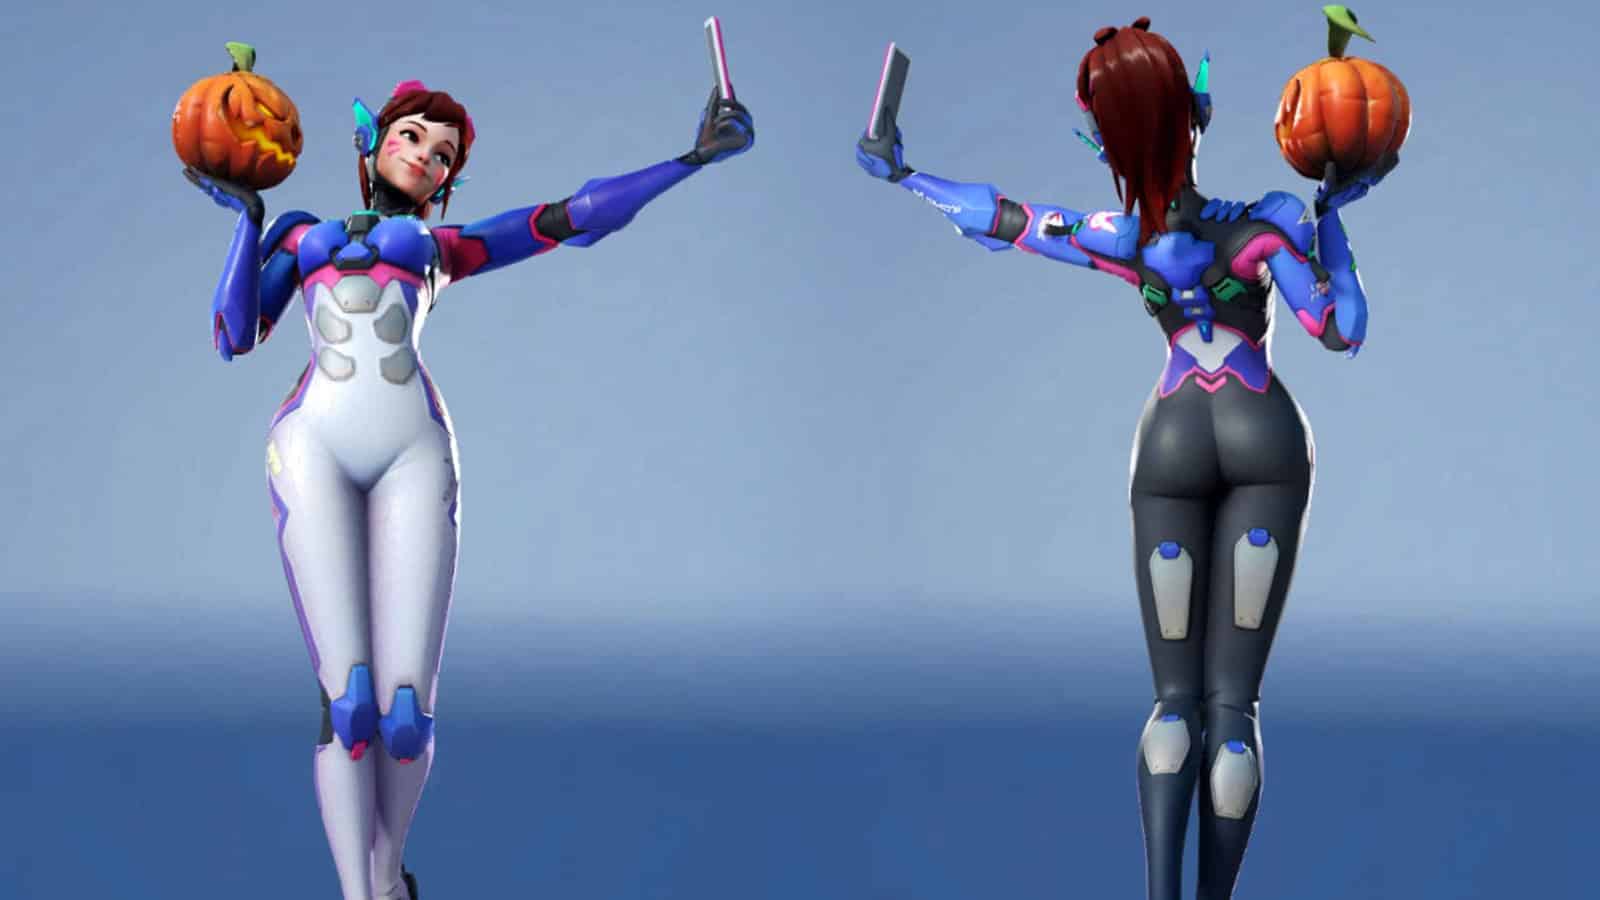 Down bad Overwatch fans freak out over D.Va's “booty buff” in OW2 - Dexerto